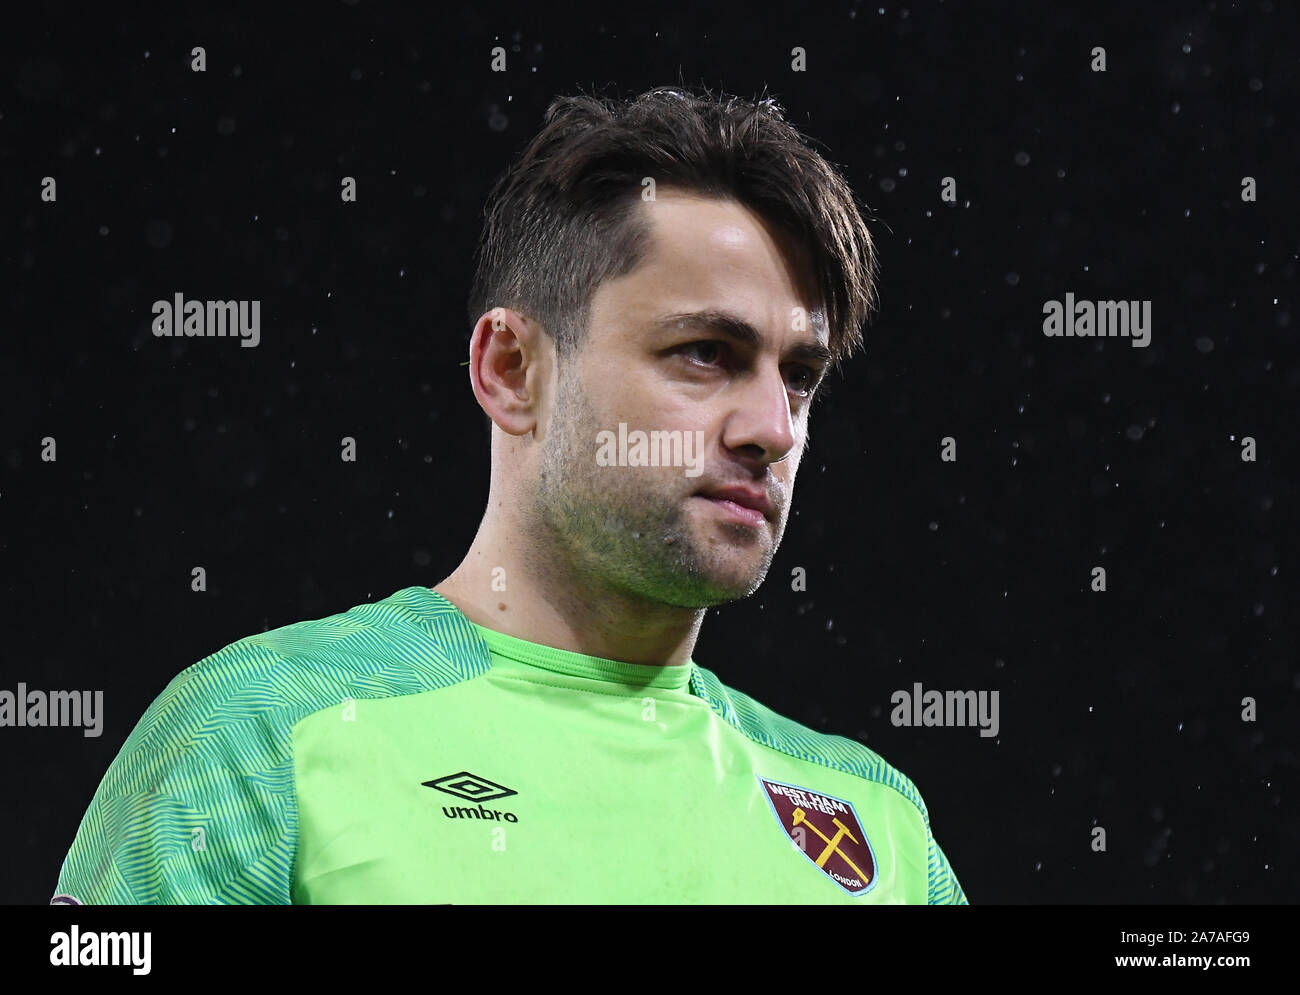 LONDON, ENGLAND - DECEMBER 15, 2018: Lukasz Fabianski of West Ham pictured during the 2018/19 Premier League game between Fulham FC and West Ham United at Craven Cottage. Stock Photo